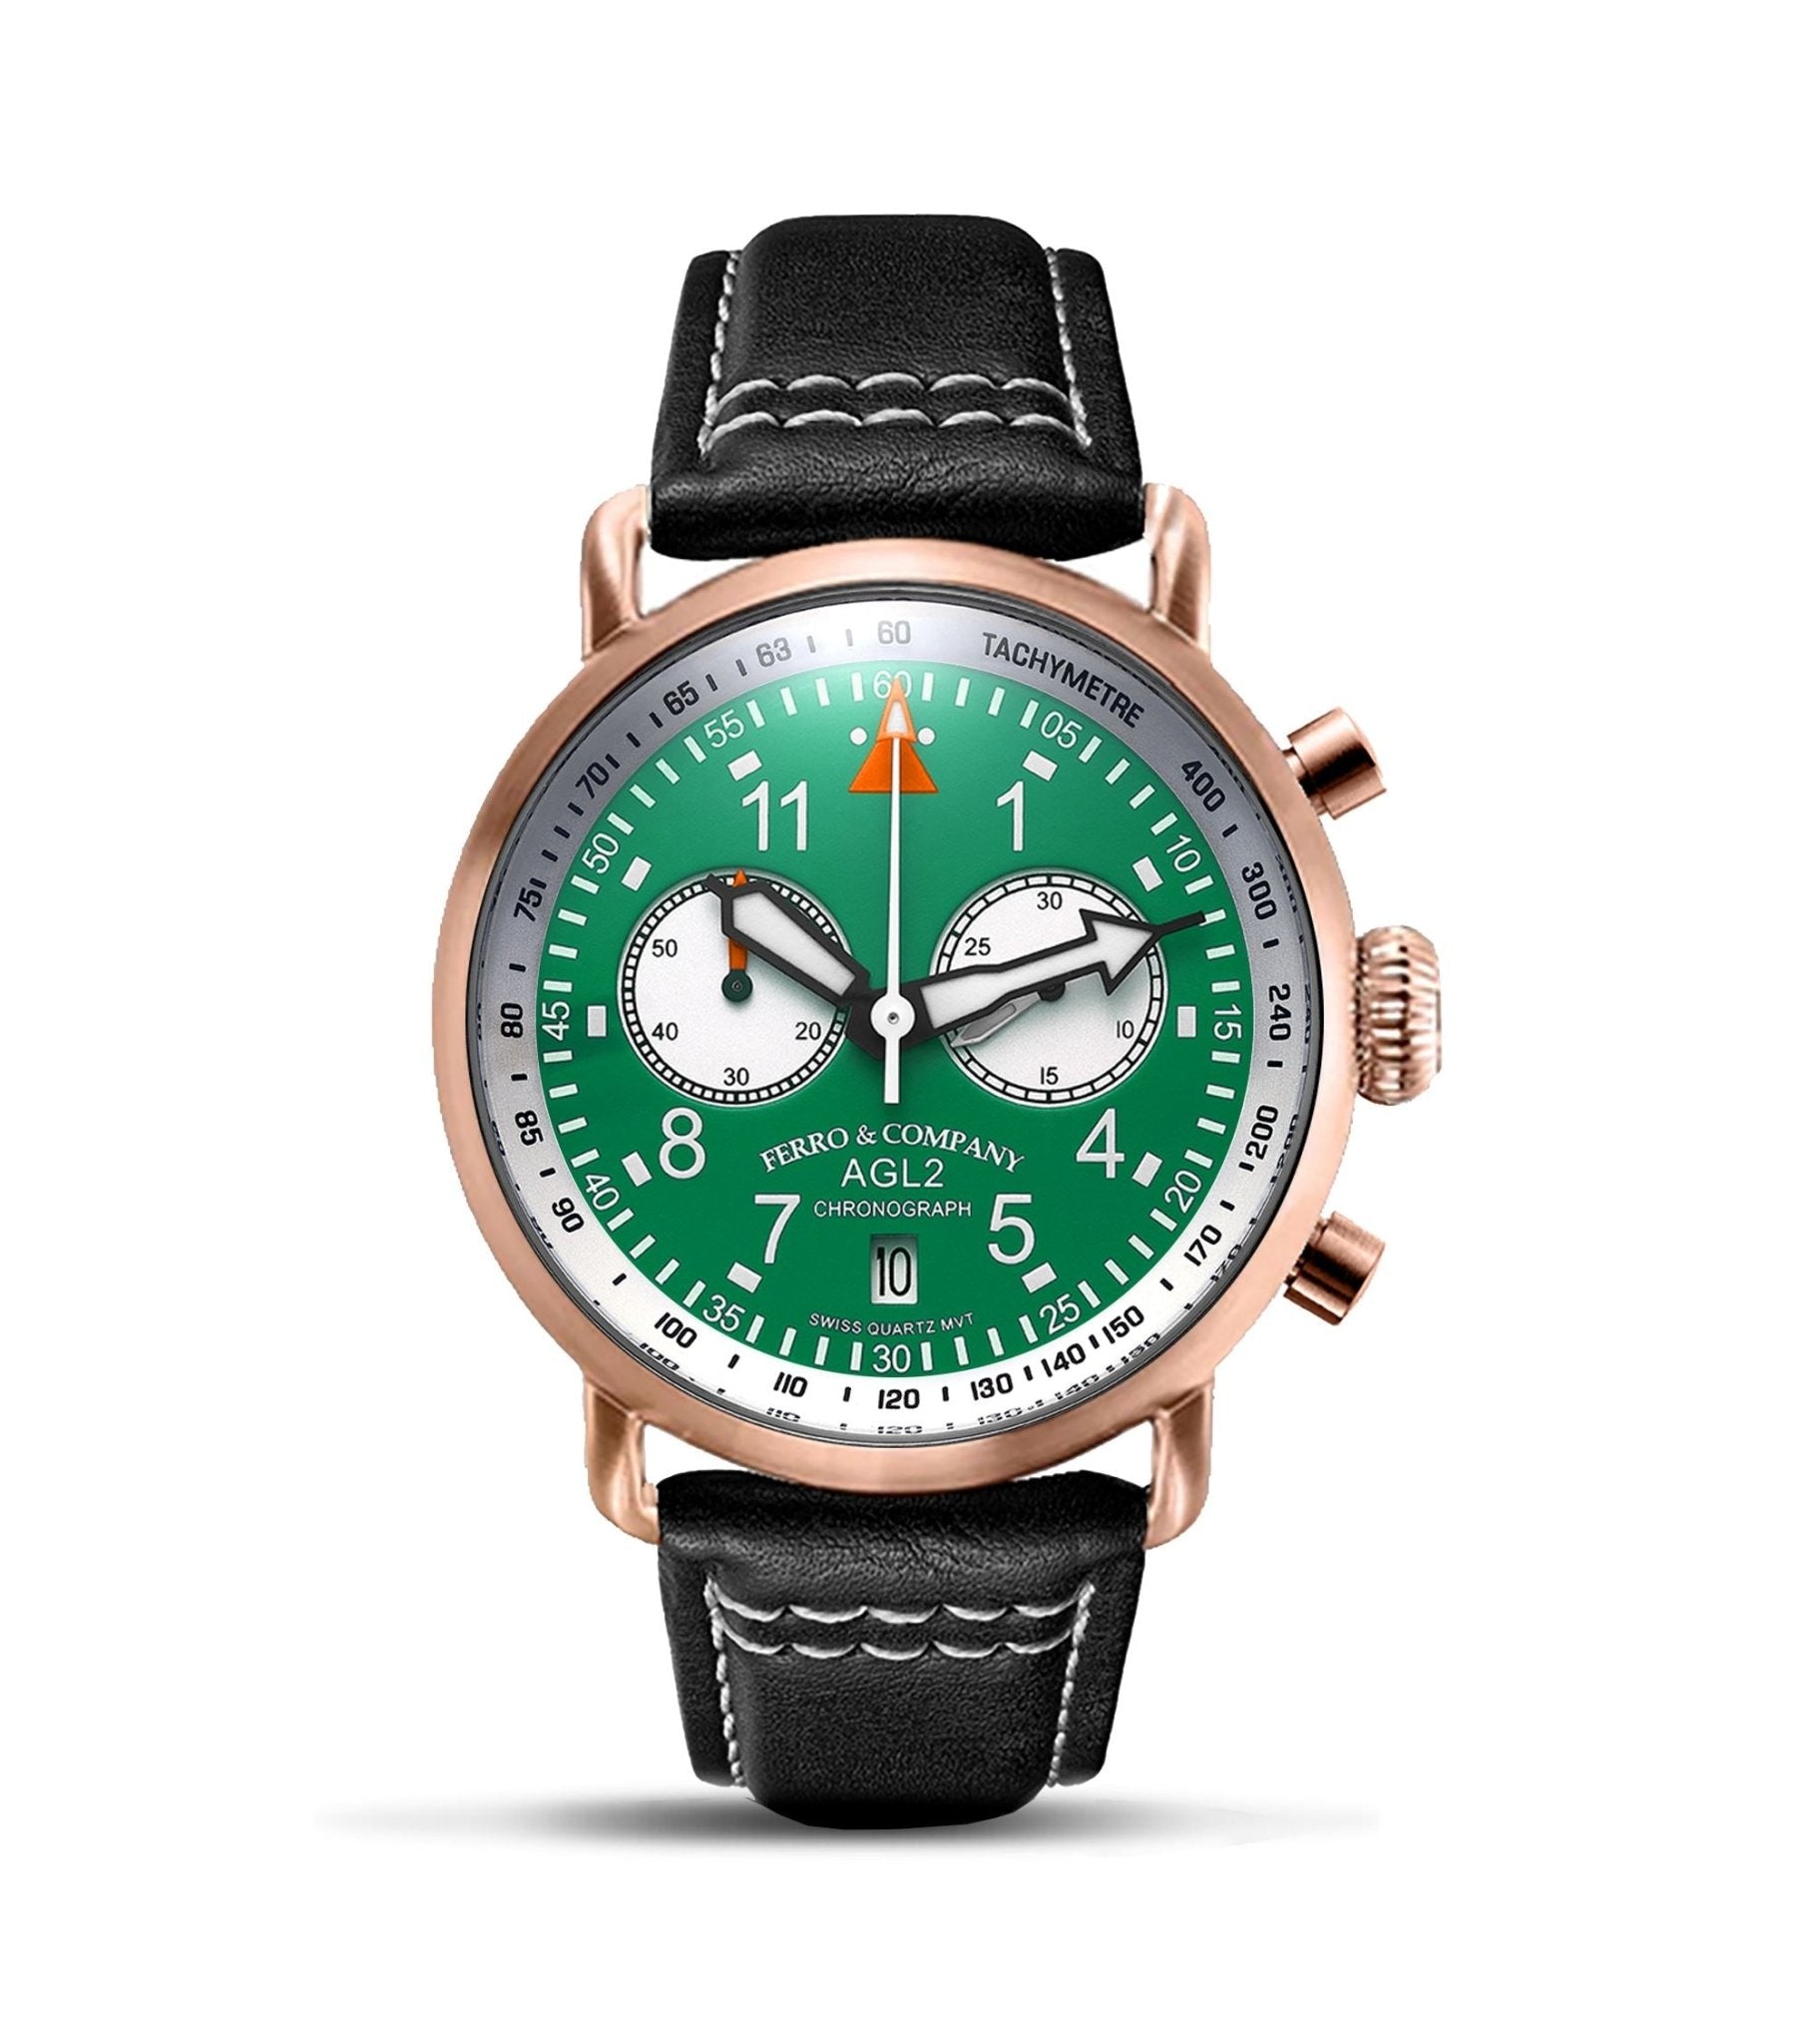 Ferro Watches AGL 2 Vintage style Pilot Watch Chronograph Green Rose Gold - Ferro & Company Watches